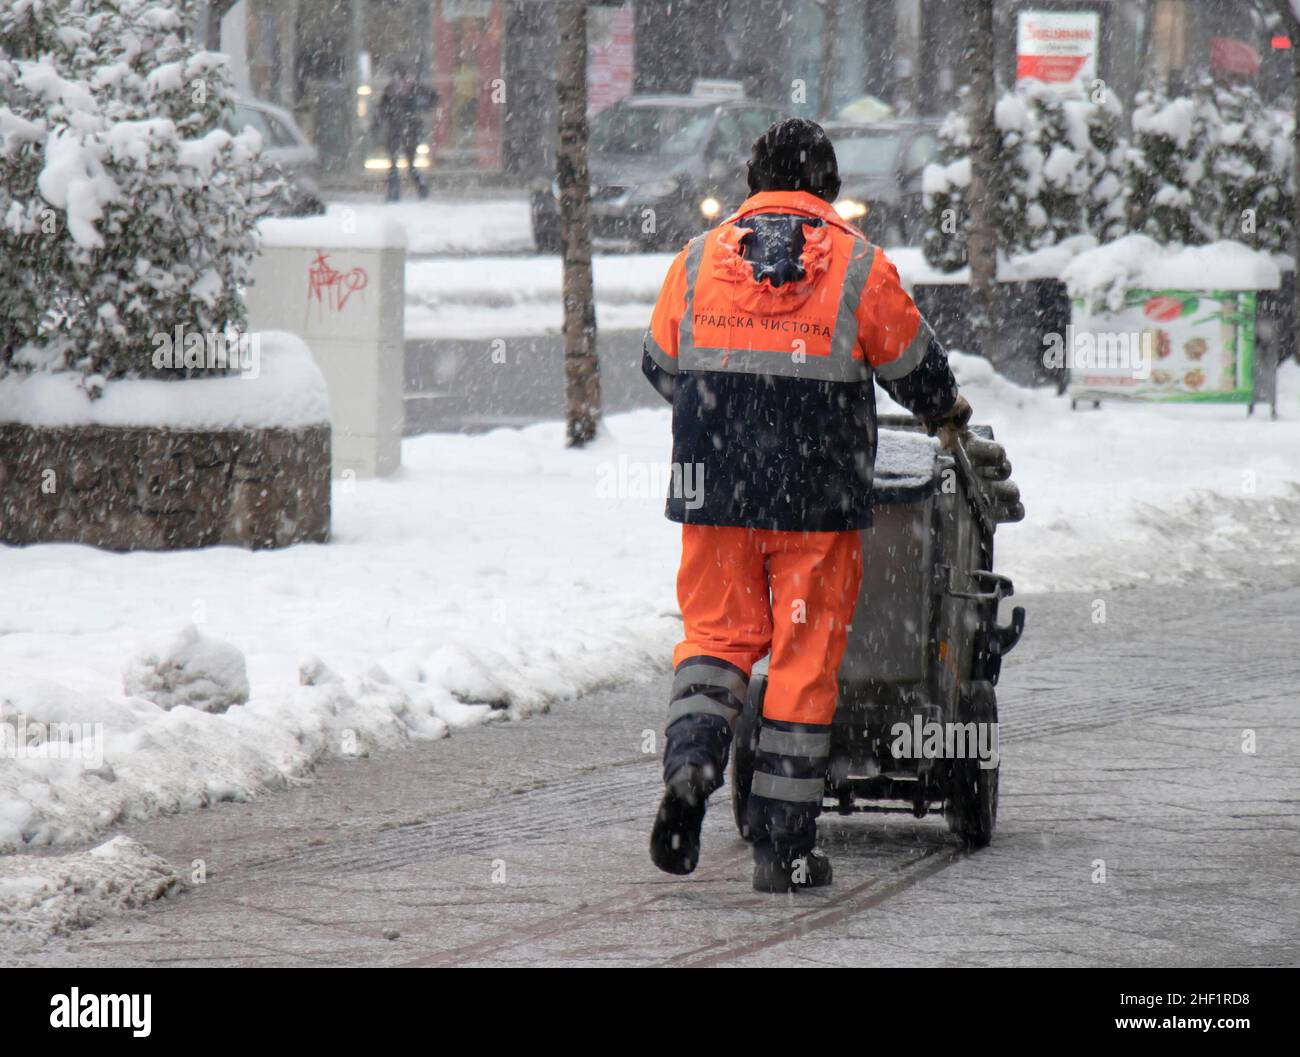 Belgrade, Serbia - January 11, 2022: One man working for city cleaning service pushing the collector bin on city street as walking away, on a snowy wi Stock Photo